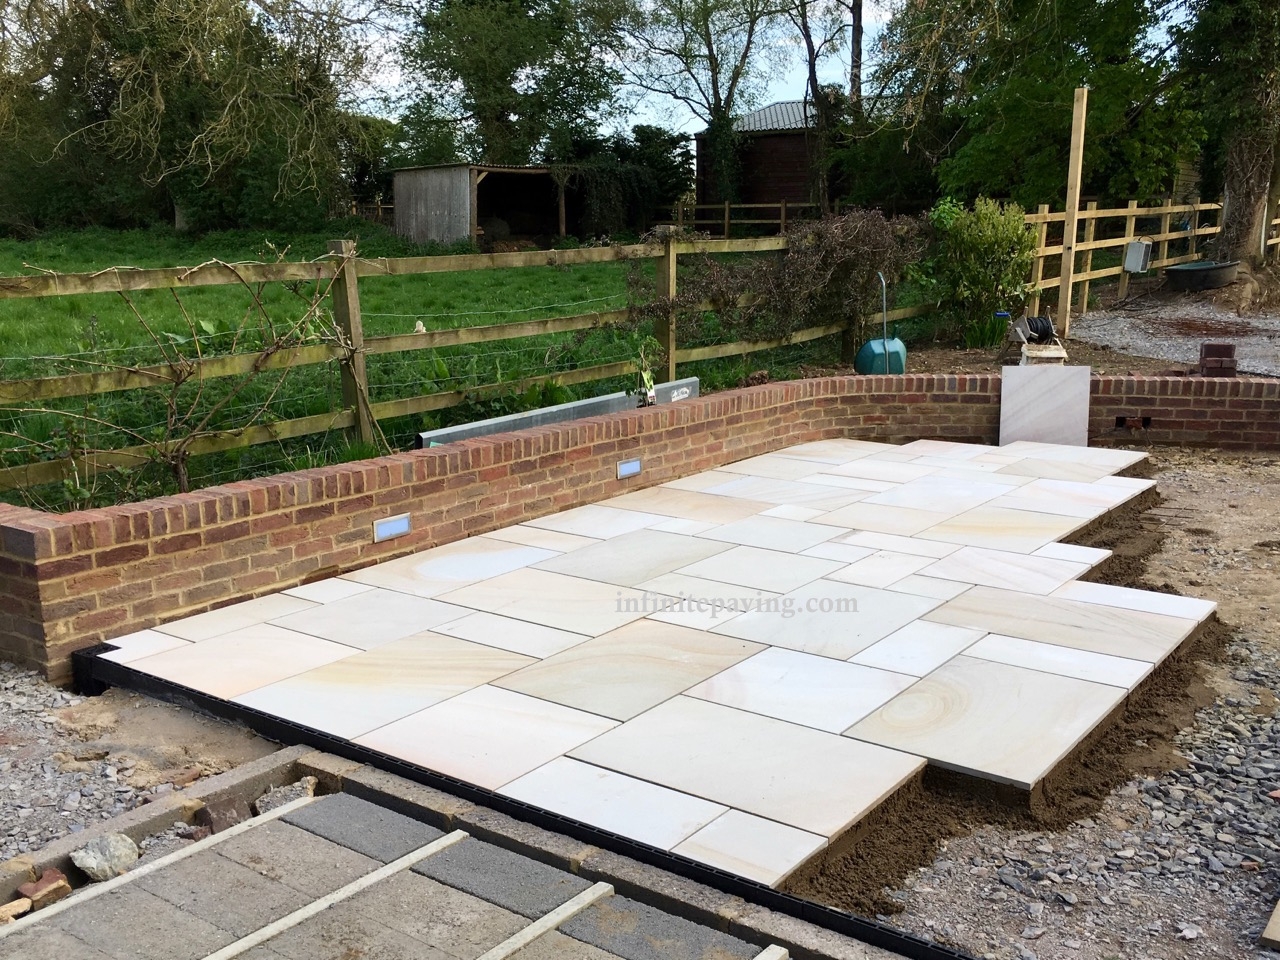 Sawn Camel Dust Honed 900x600mm Paving Stone Pack 22mm 17.5m² – Indian Sandstone – £29 Per M² – Infinite Paving